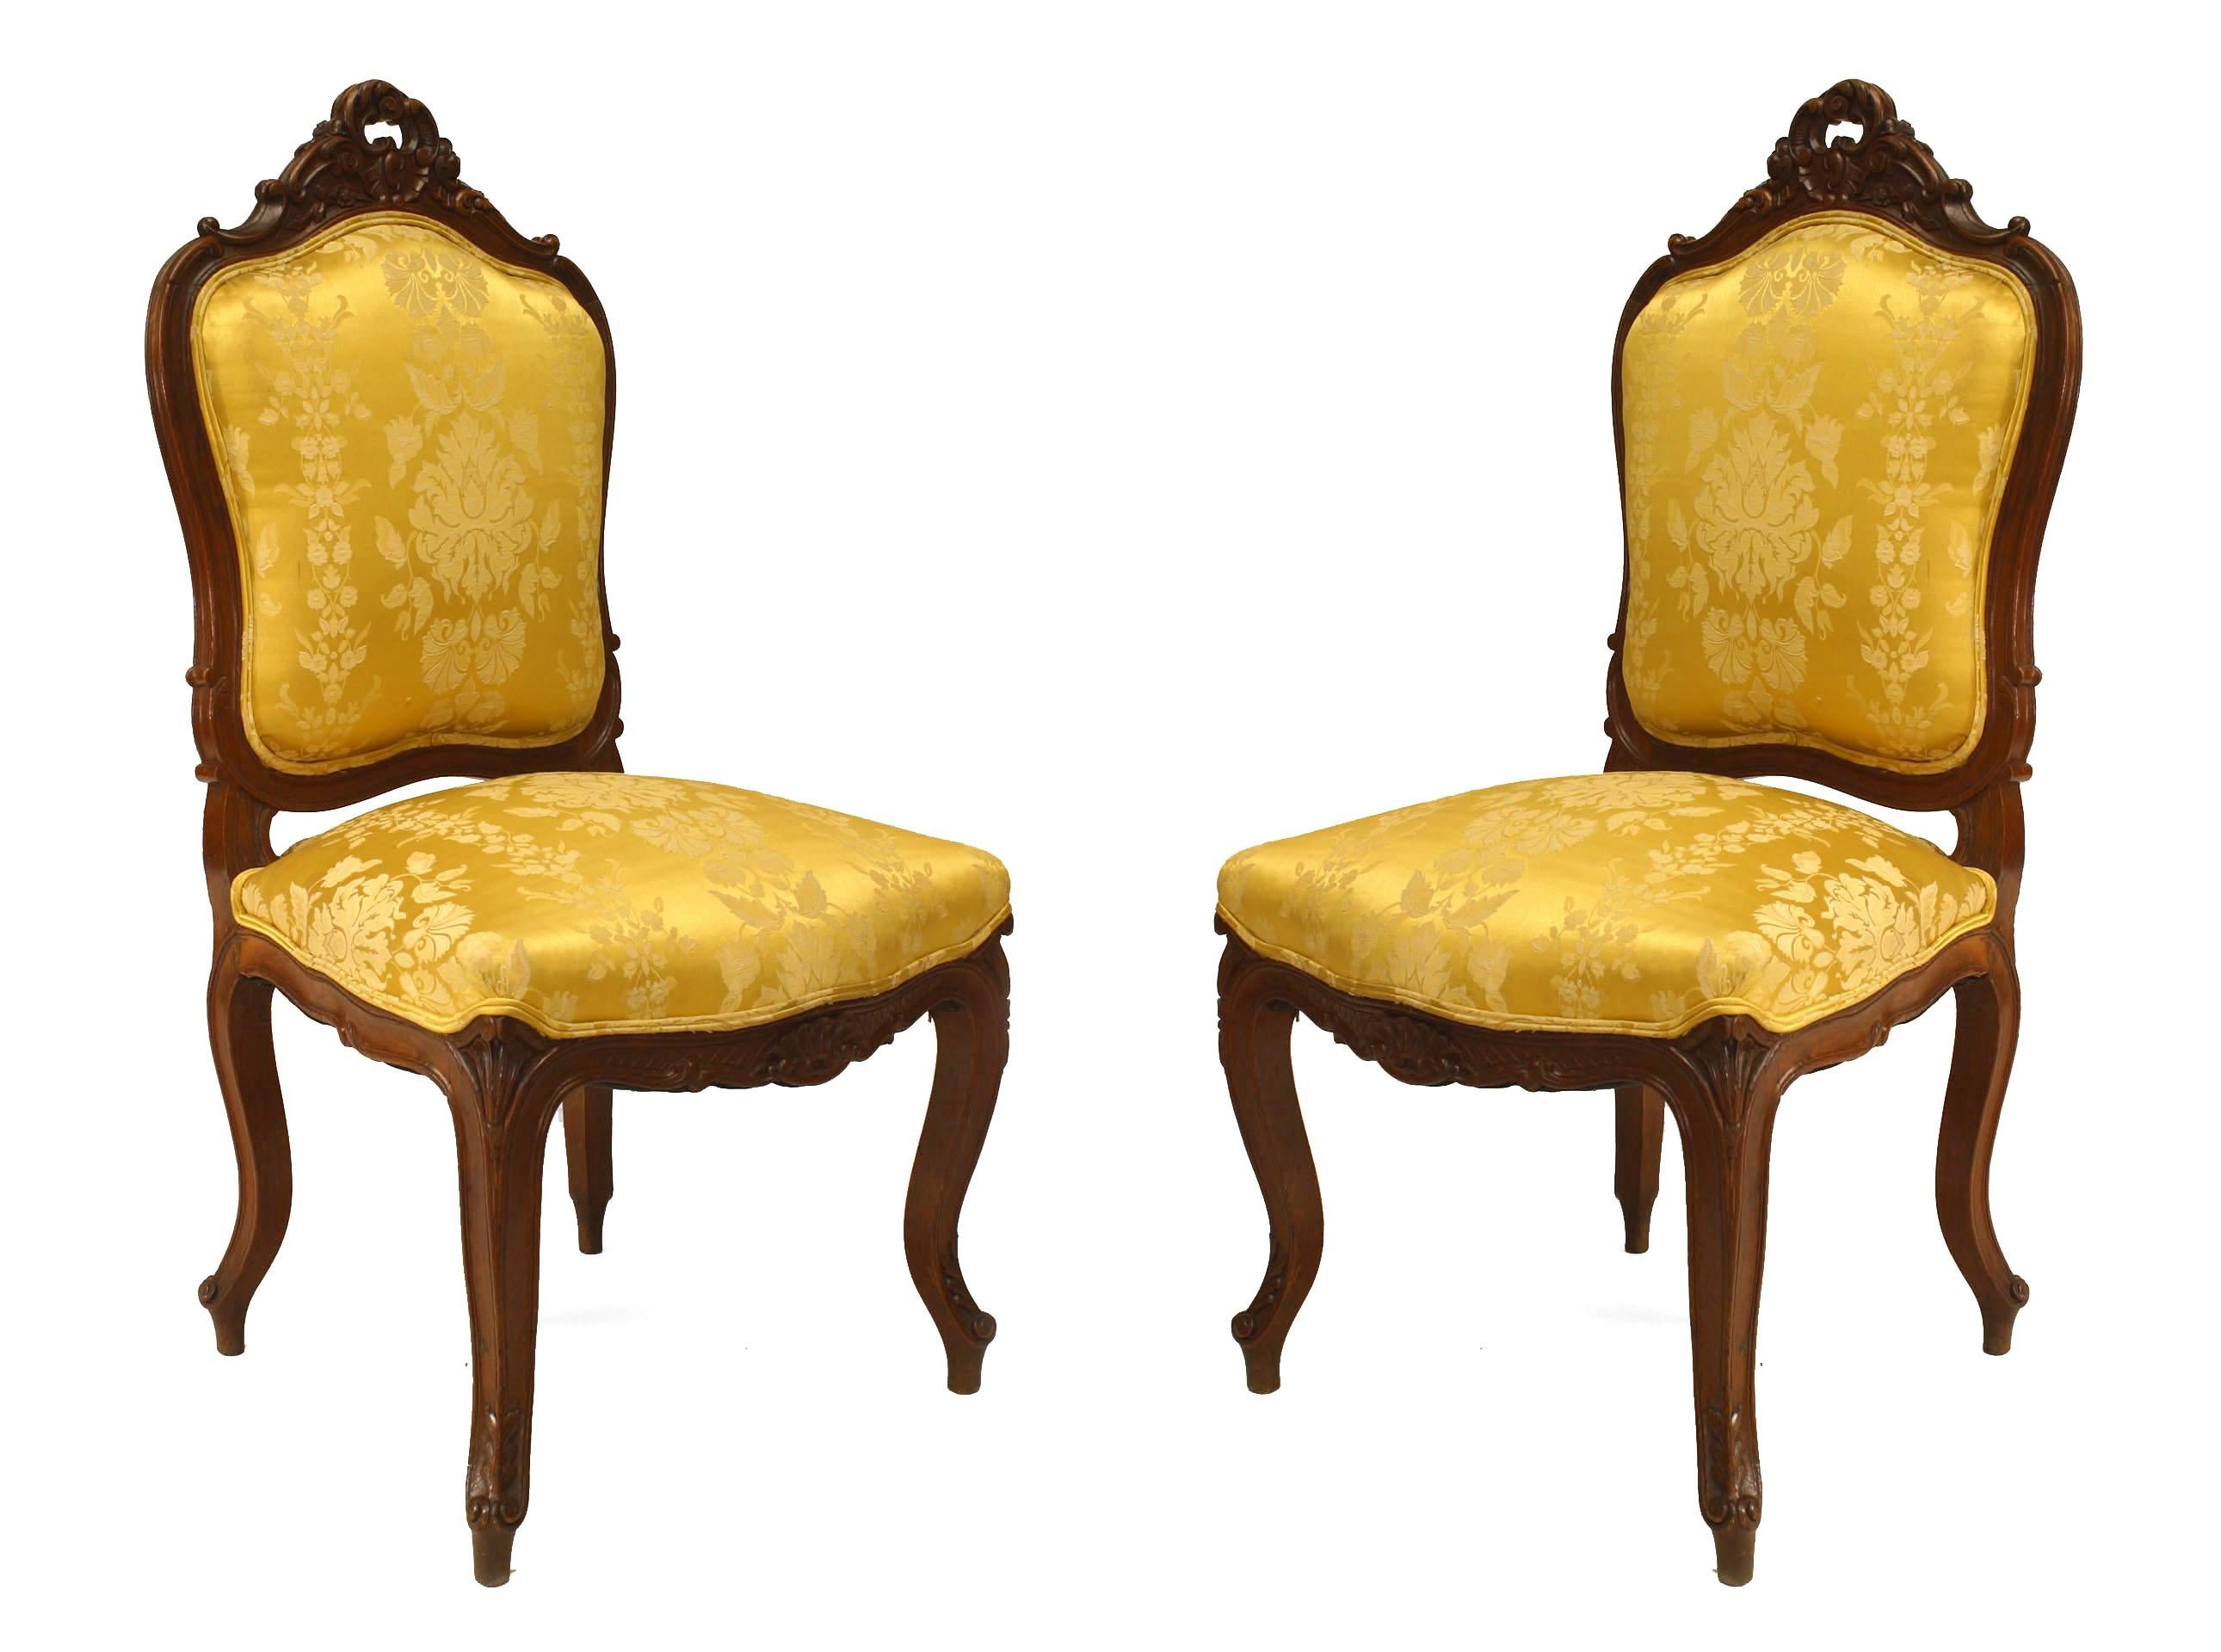 Set of 5 French Louis XV-style (19/20th Cent) walnut high-back salon set with gold damask upholstery. 2 arms: 27